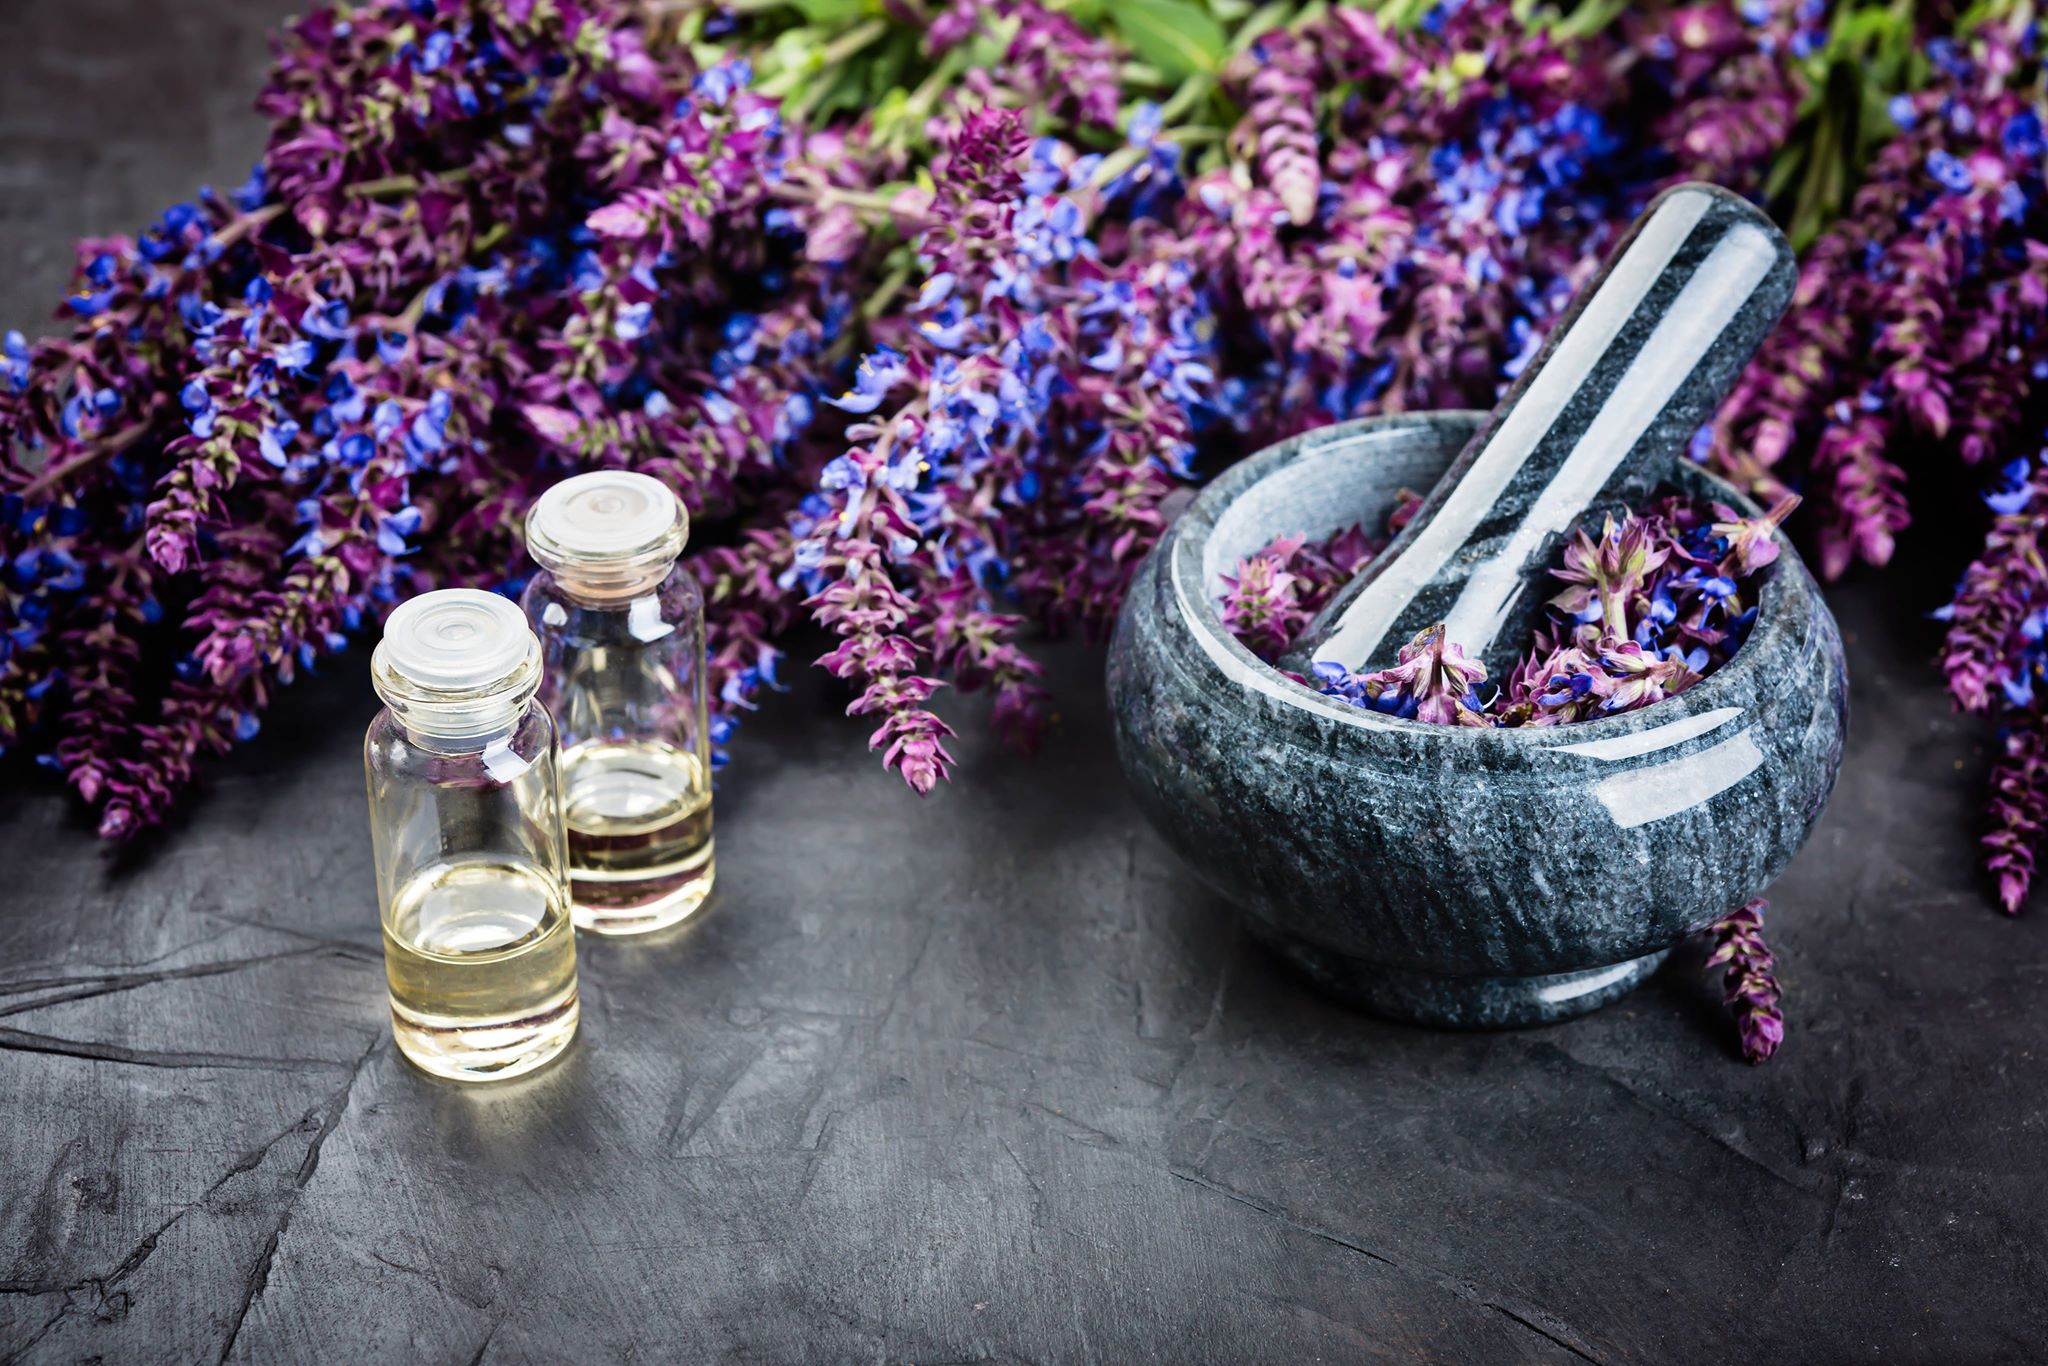 vials of lavender oil with lavender flowers